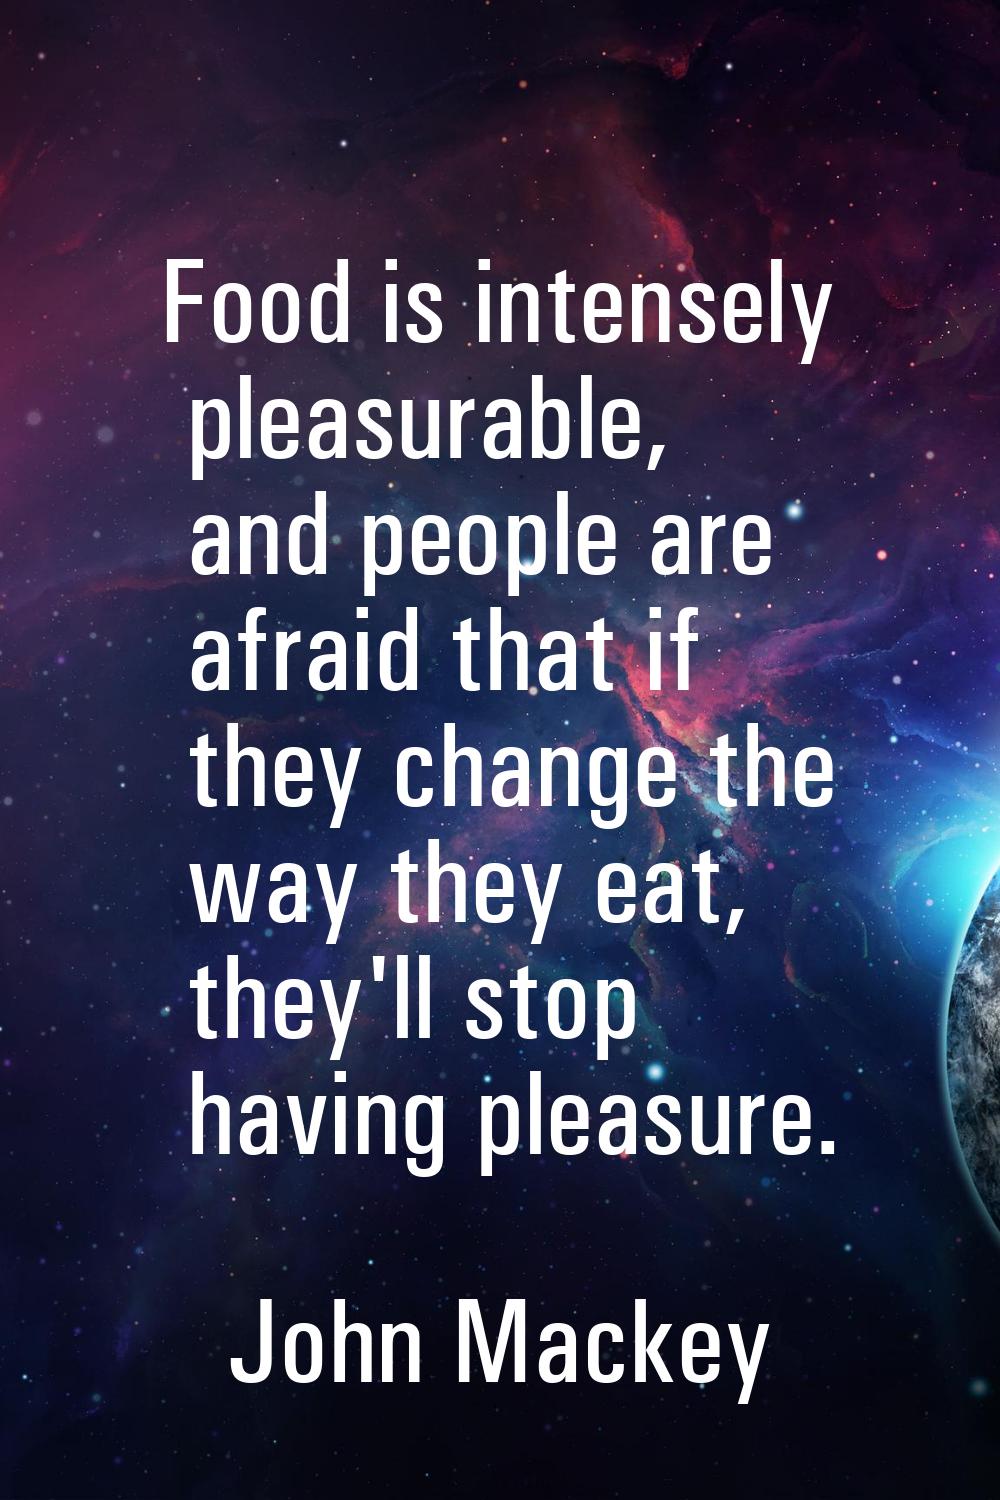 Food is intensely pleasurable, and people are afraid that if they change the way they eat, they'll 